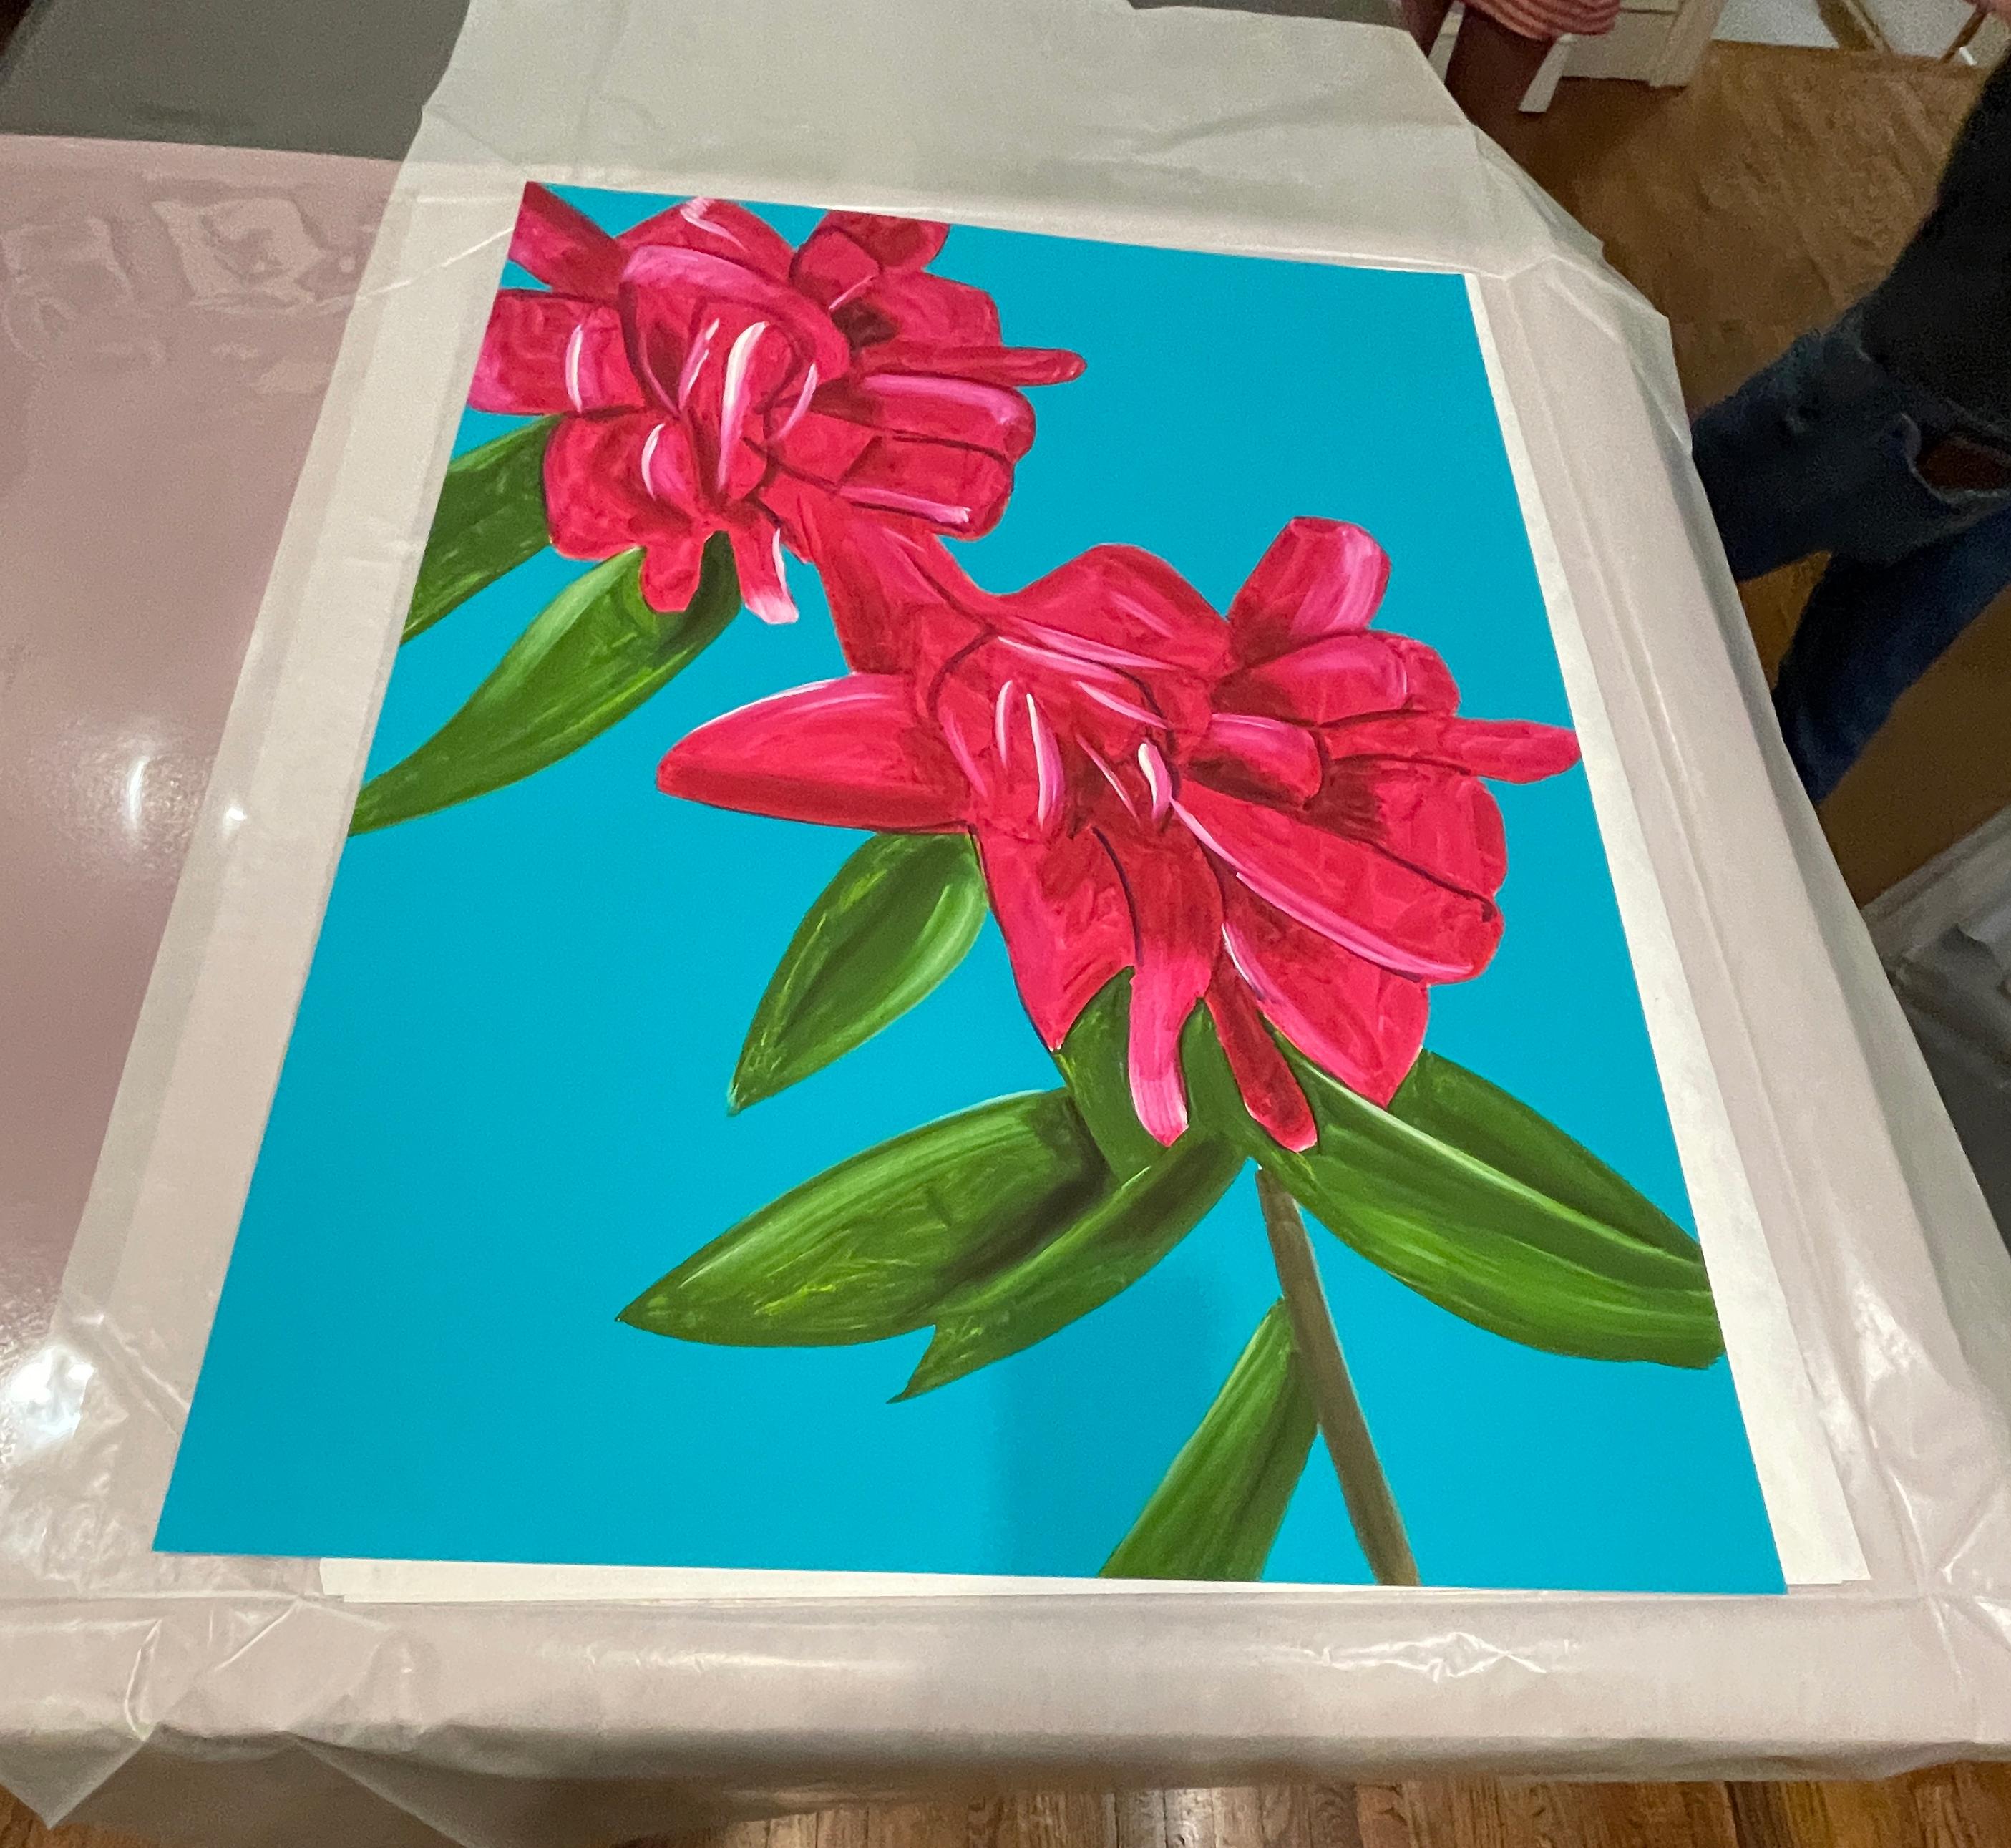 Artist: Alex Katz
Title: Peonies
Medium: Archival pigment ink on Innova Etching Cotton Rag 315 gsm fine art paper
Signed: Hand signed in pencil
Year: 2021
Edition: Edition of 100. AP 15/20.
Sheet Size: 47